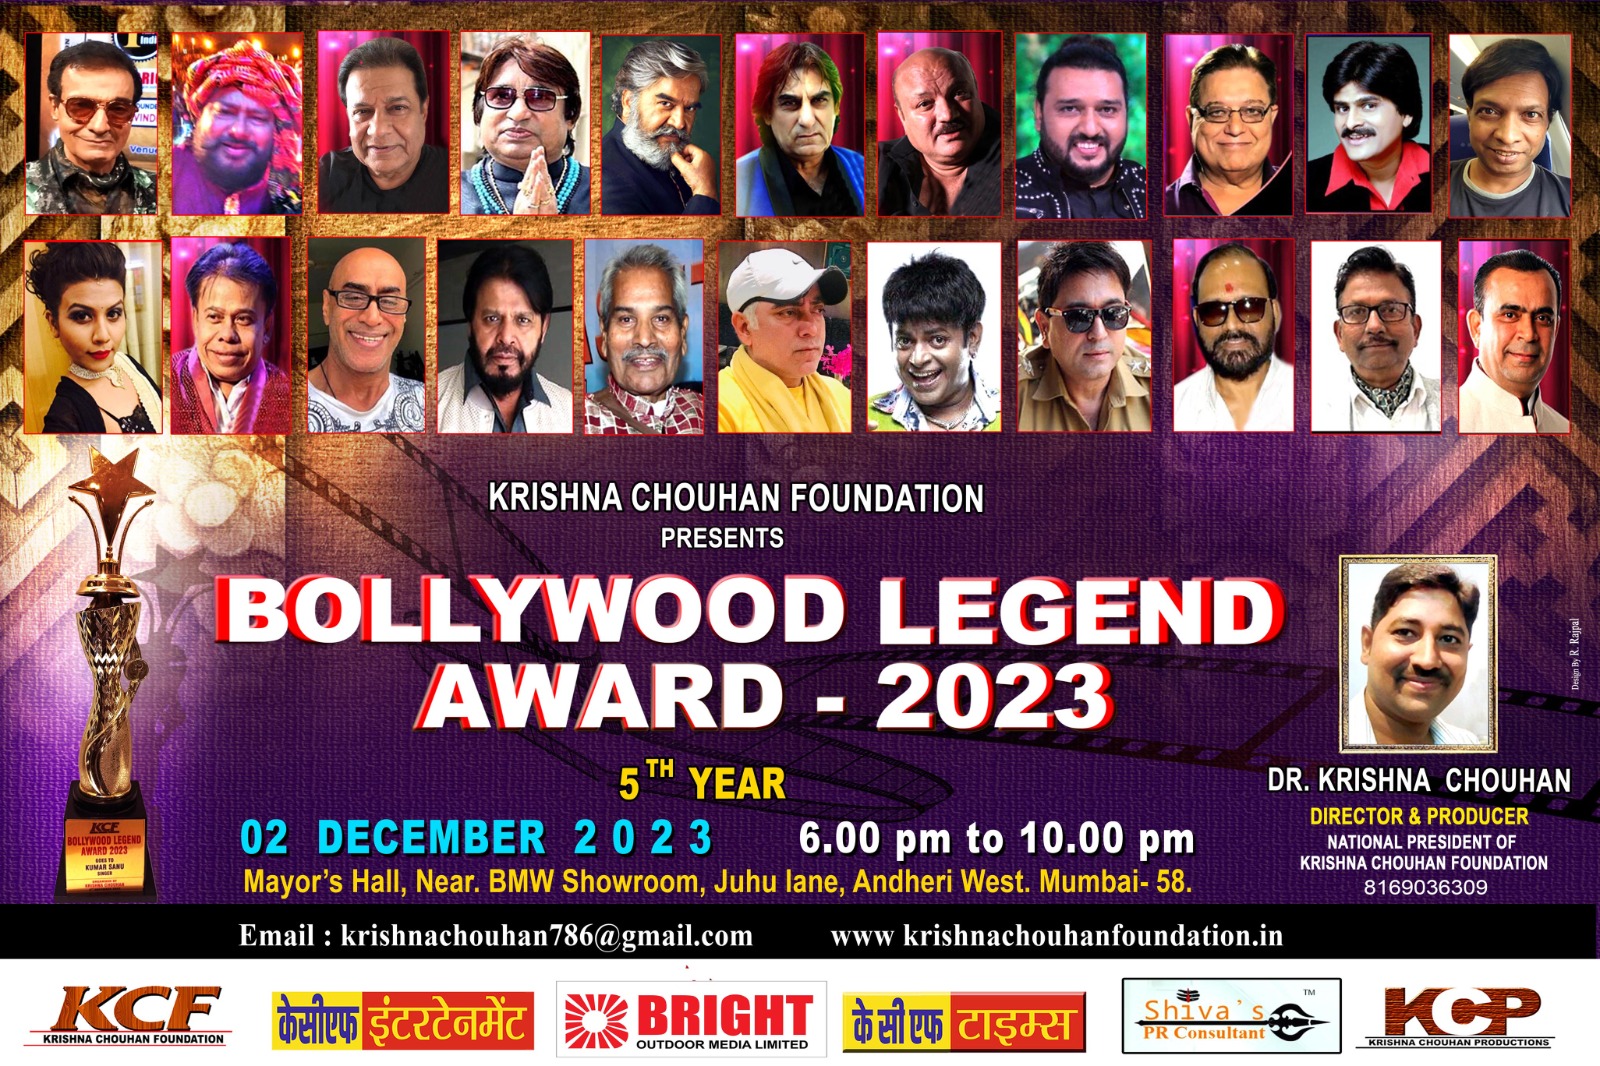 Bollywood Legend Awards 2023 Event to be Organized on December 2nd"